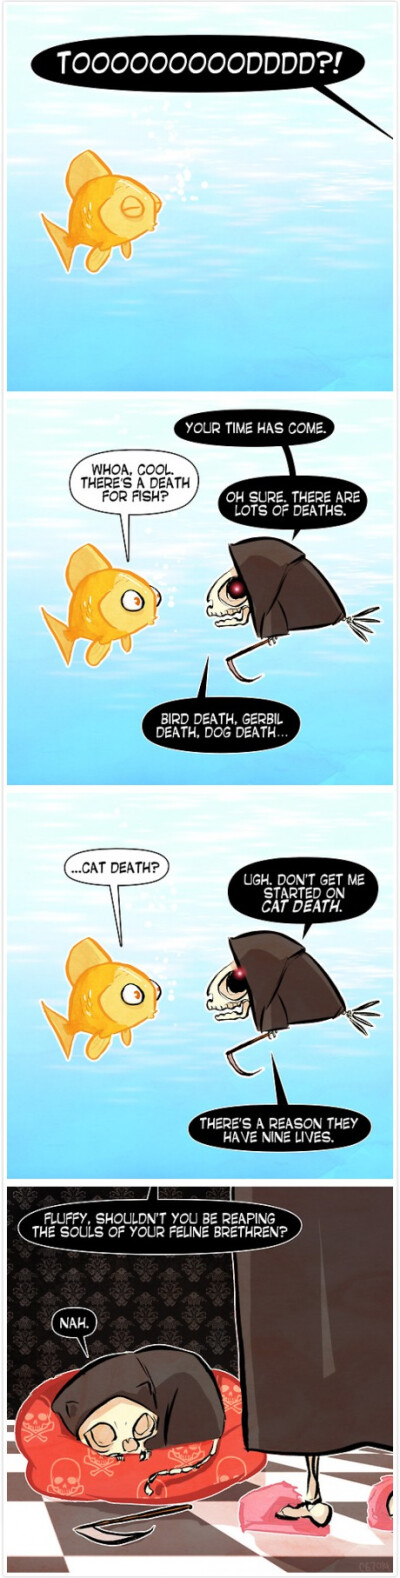 Death waits for no man... or goldfish...